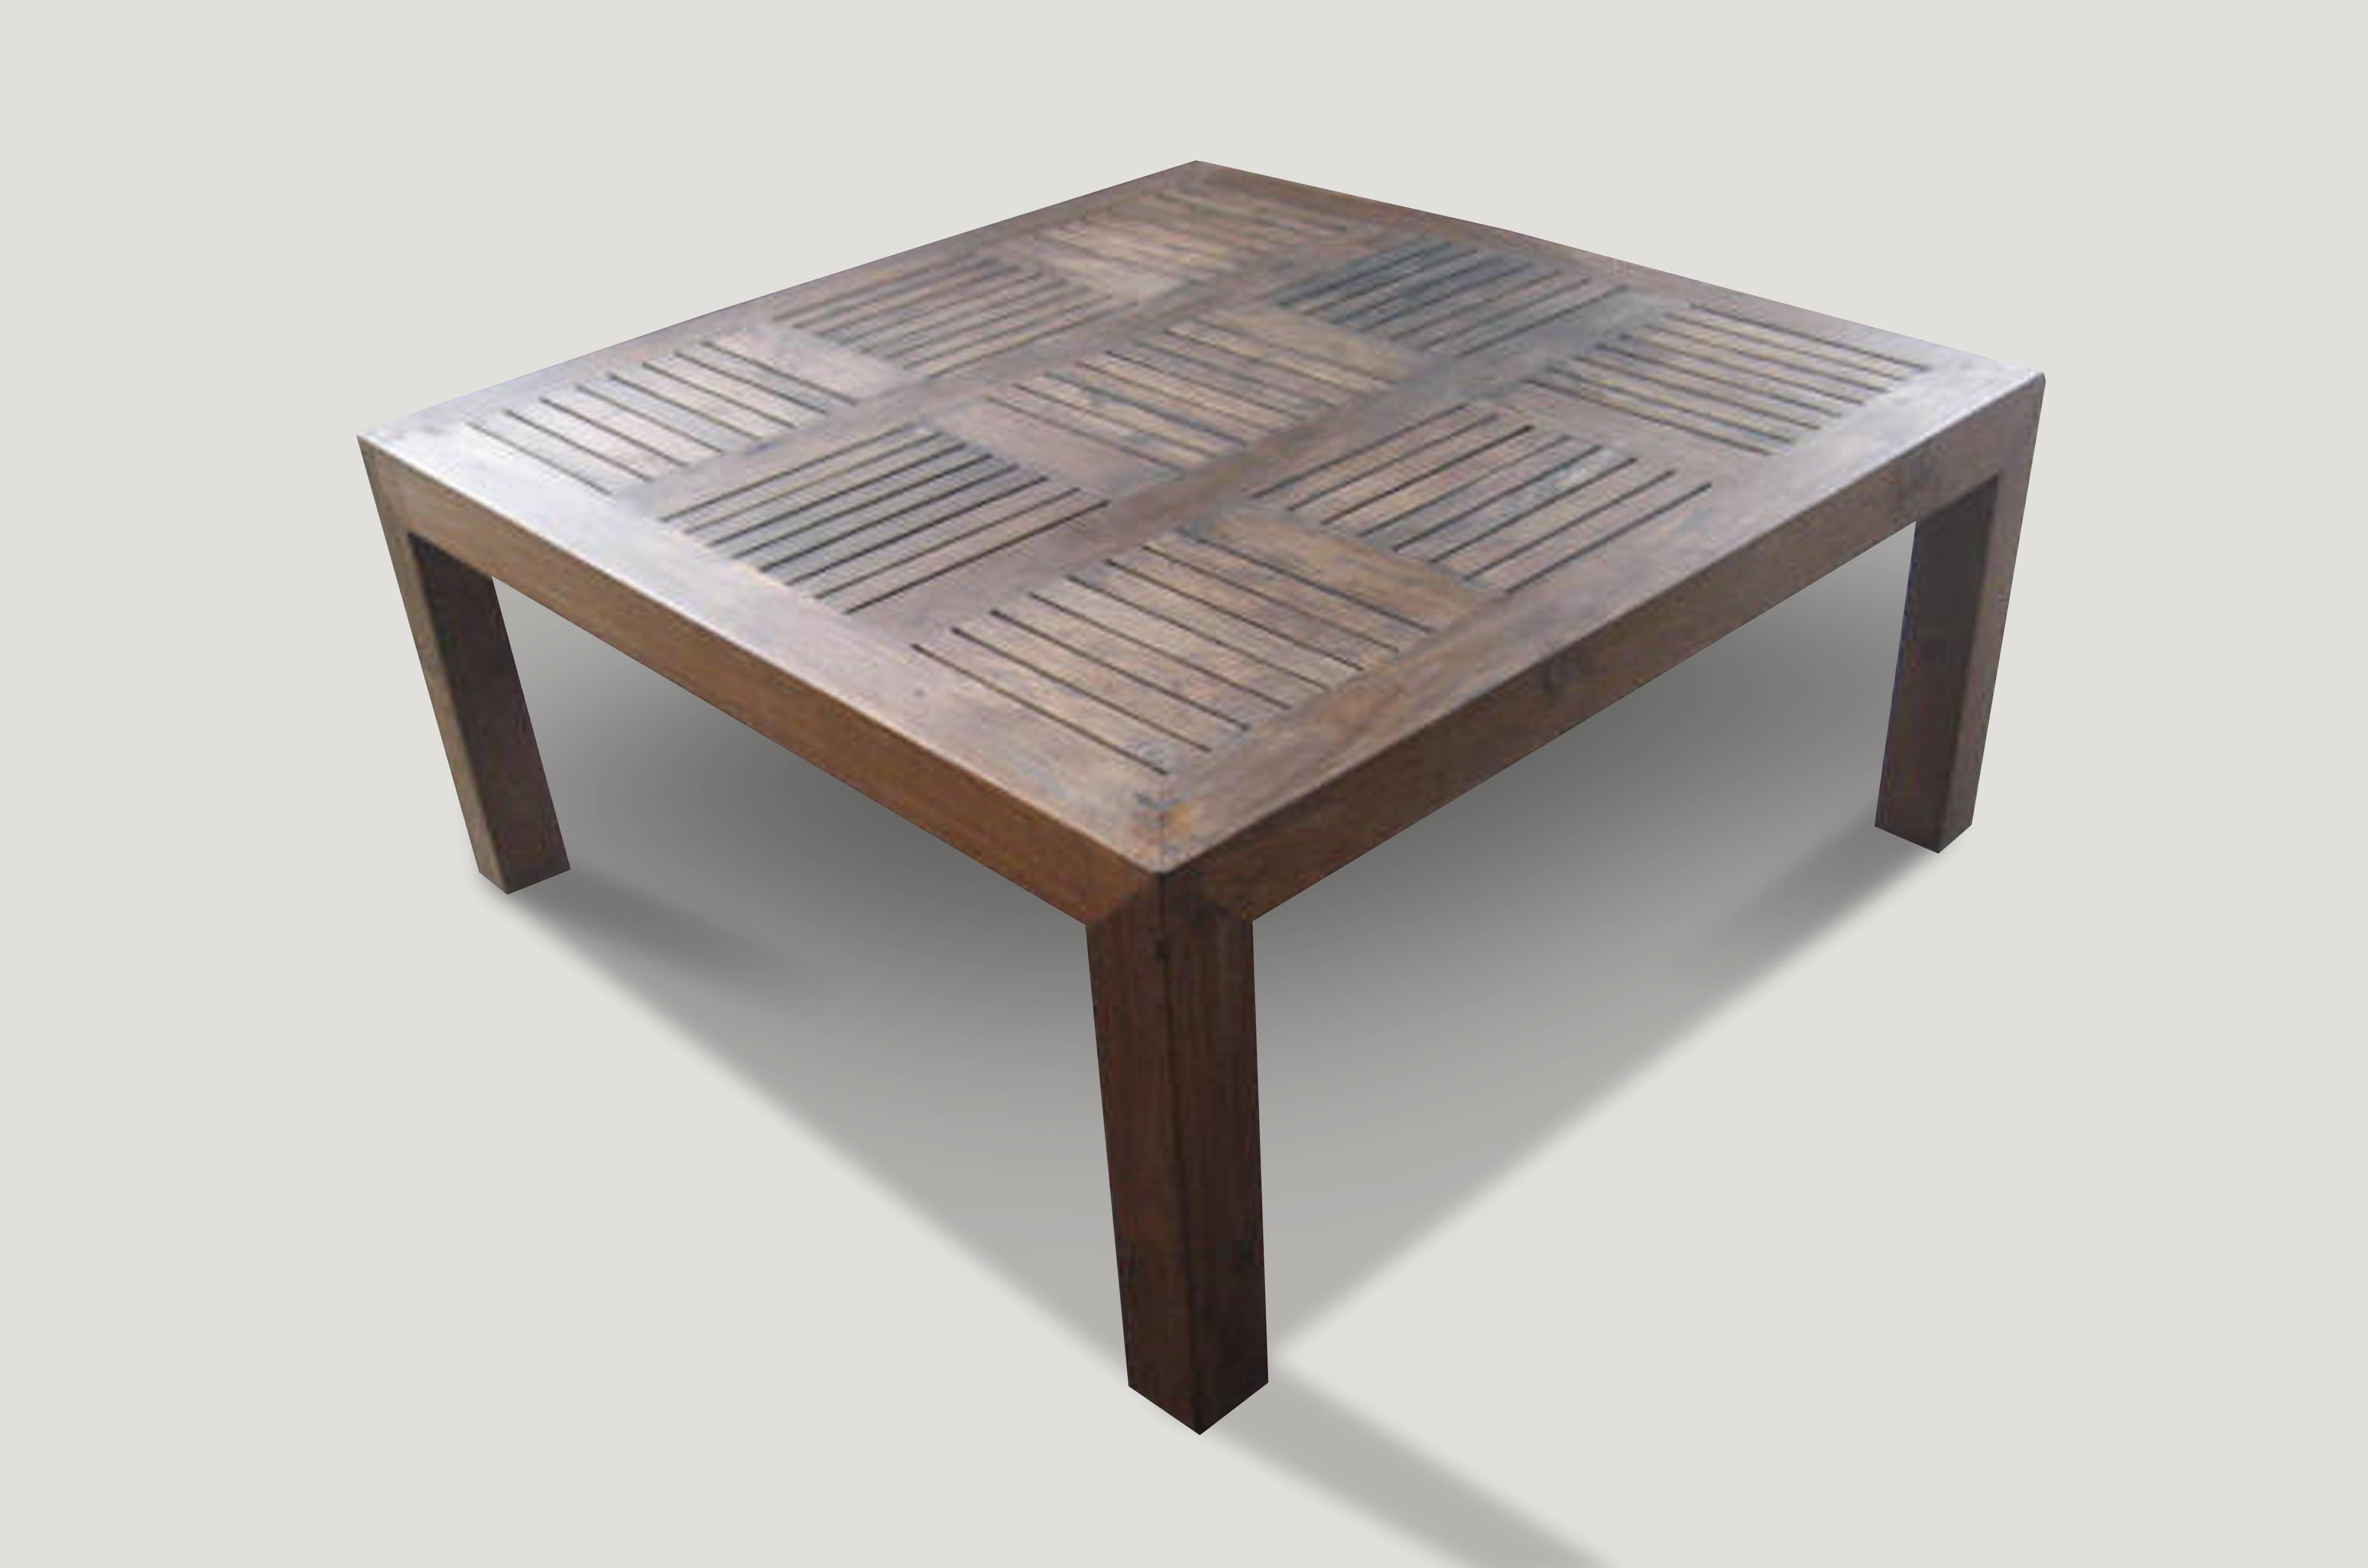 Solid teak wood framed, slatted top coffee table made from reclaimed teak wood with an oil finish to enhance the natural grain in the wood. Perfect for inside or outside living.

Andrianna Shamaris, Inc. The Leader In Modern Organic Design™